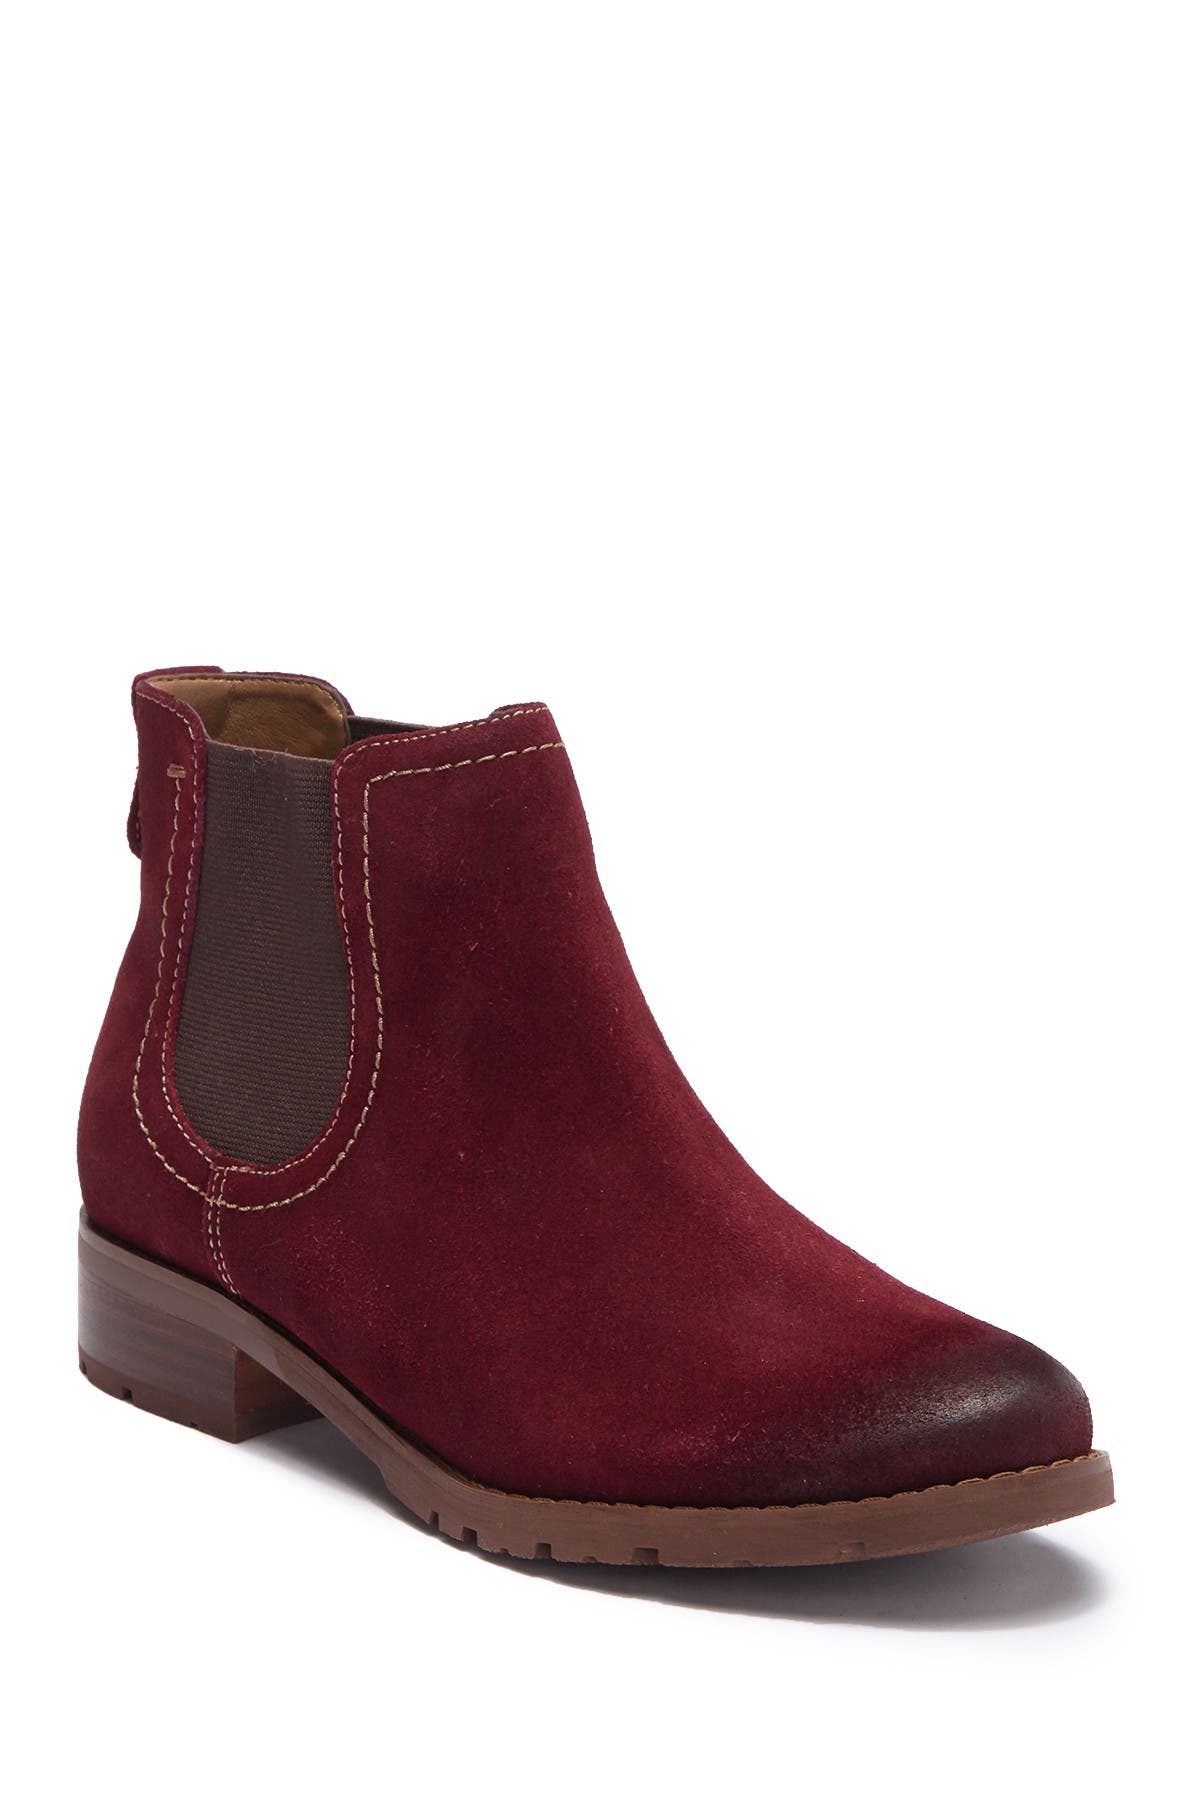 Sofft | Sherwood Suede Chelsea Boot 